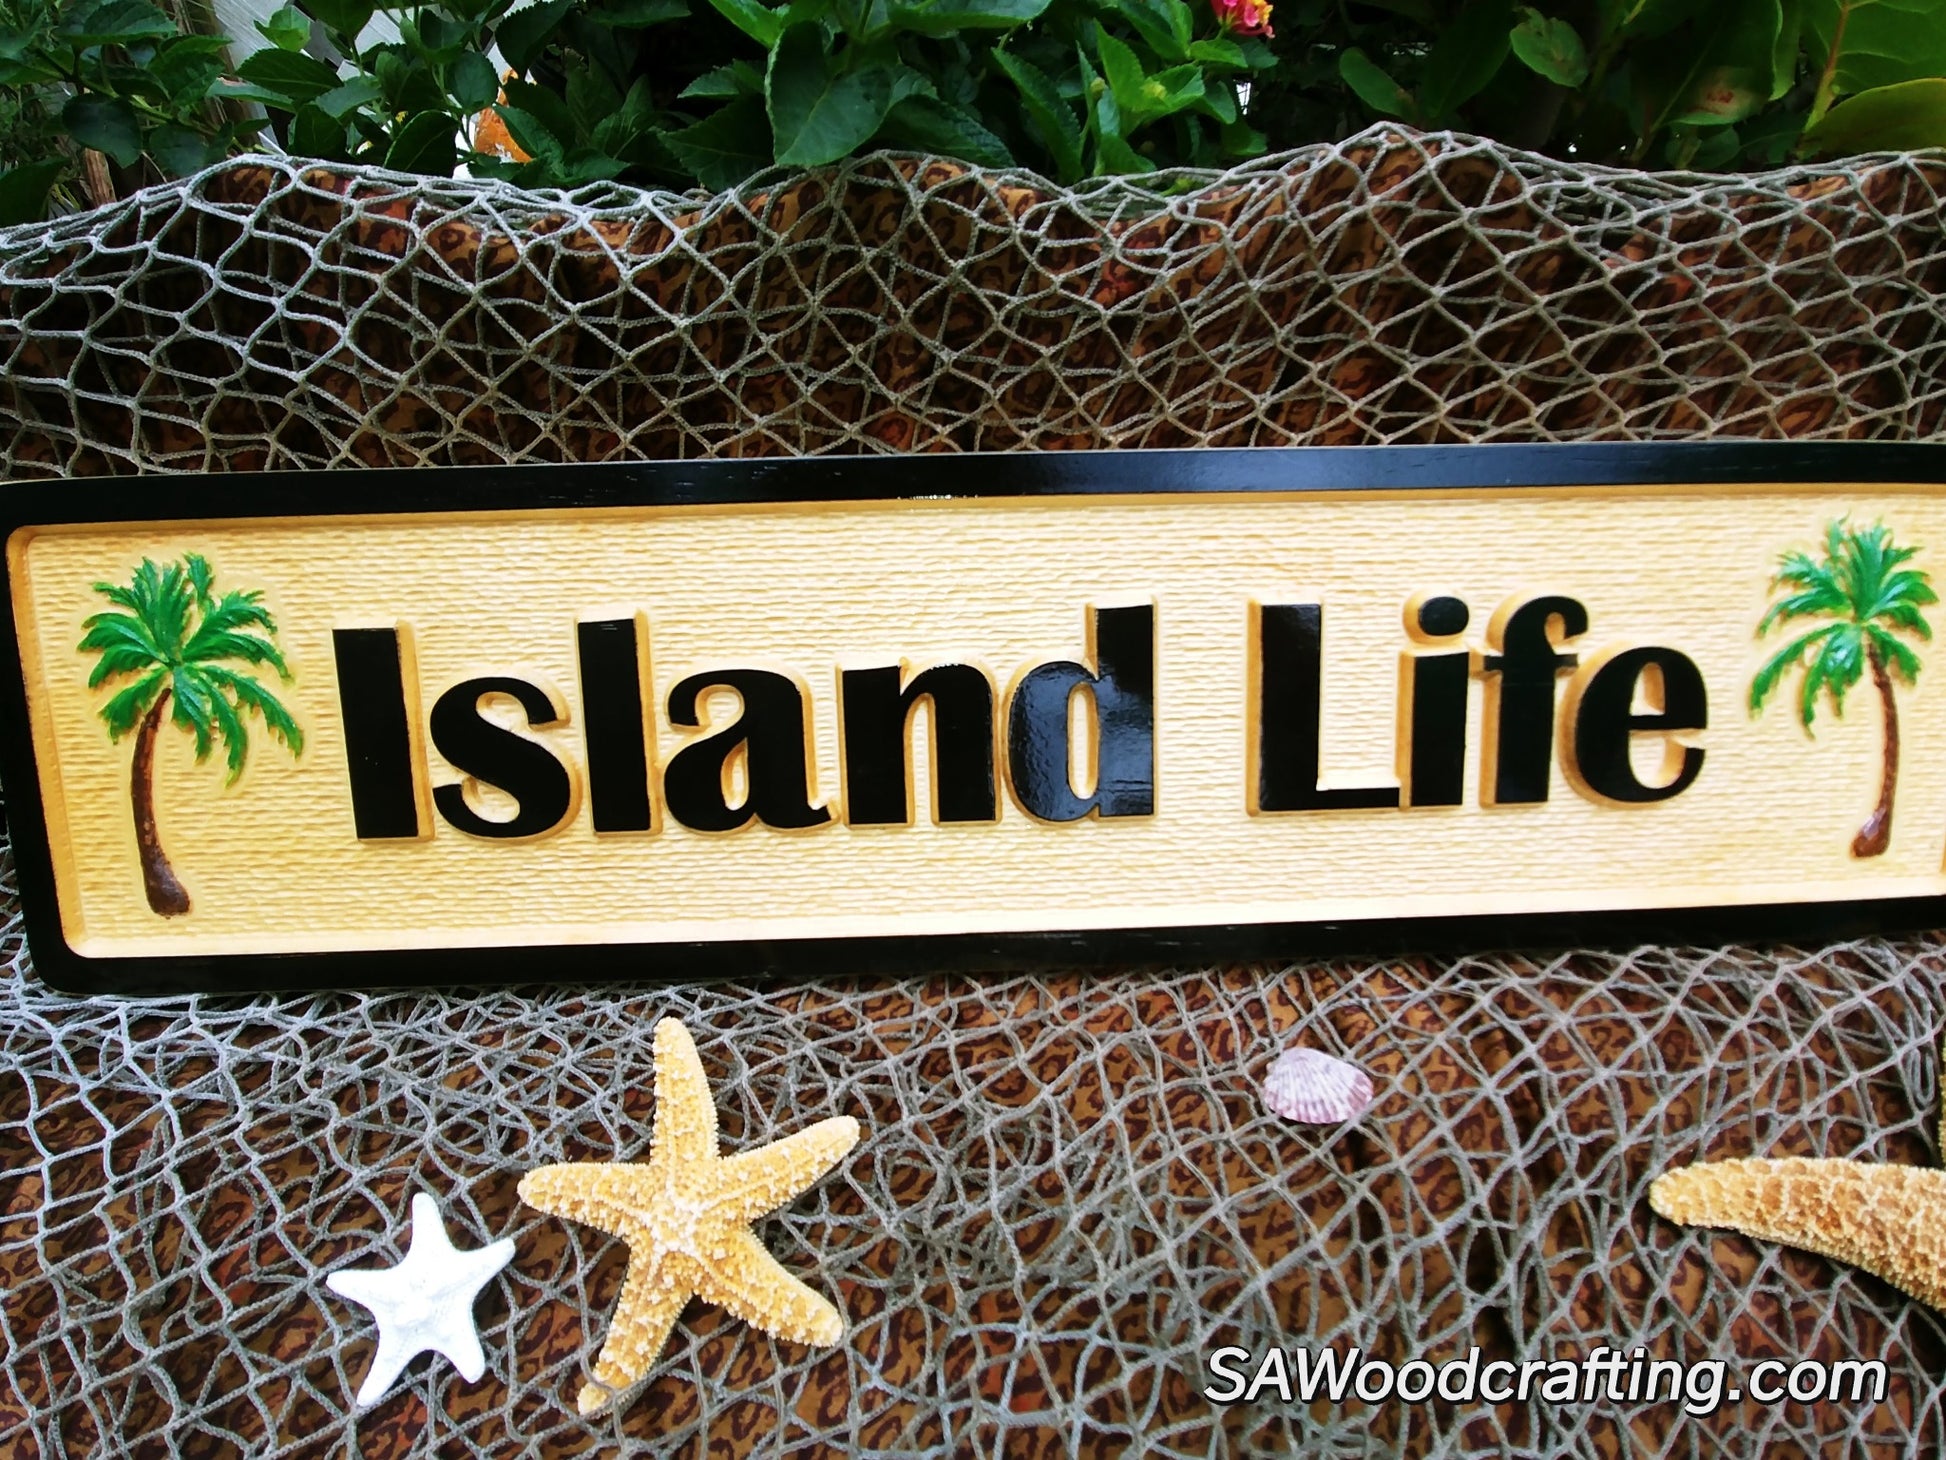 Island Life wood carved tropical wall sign for the perfect beach house decor or Tiki bar decoration. Made in the USA.